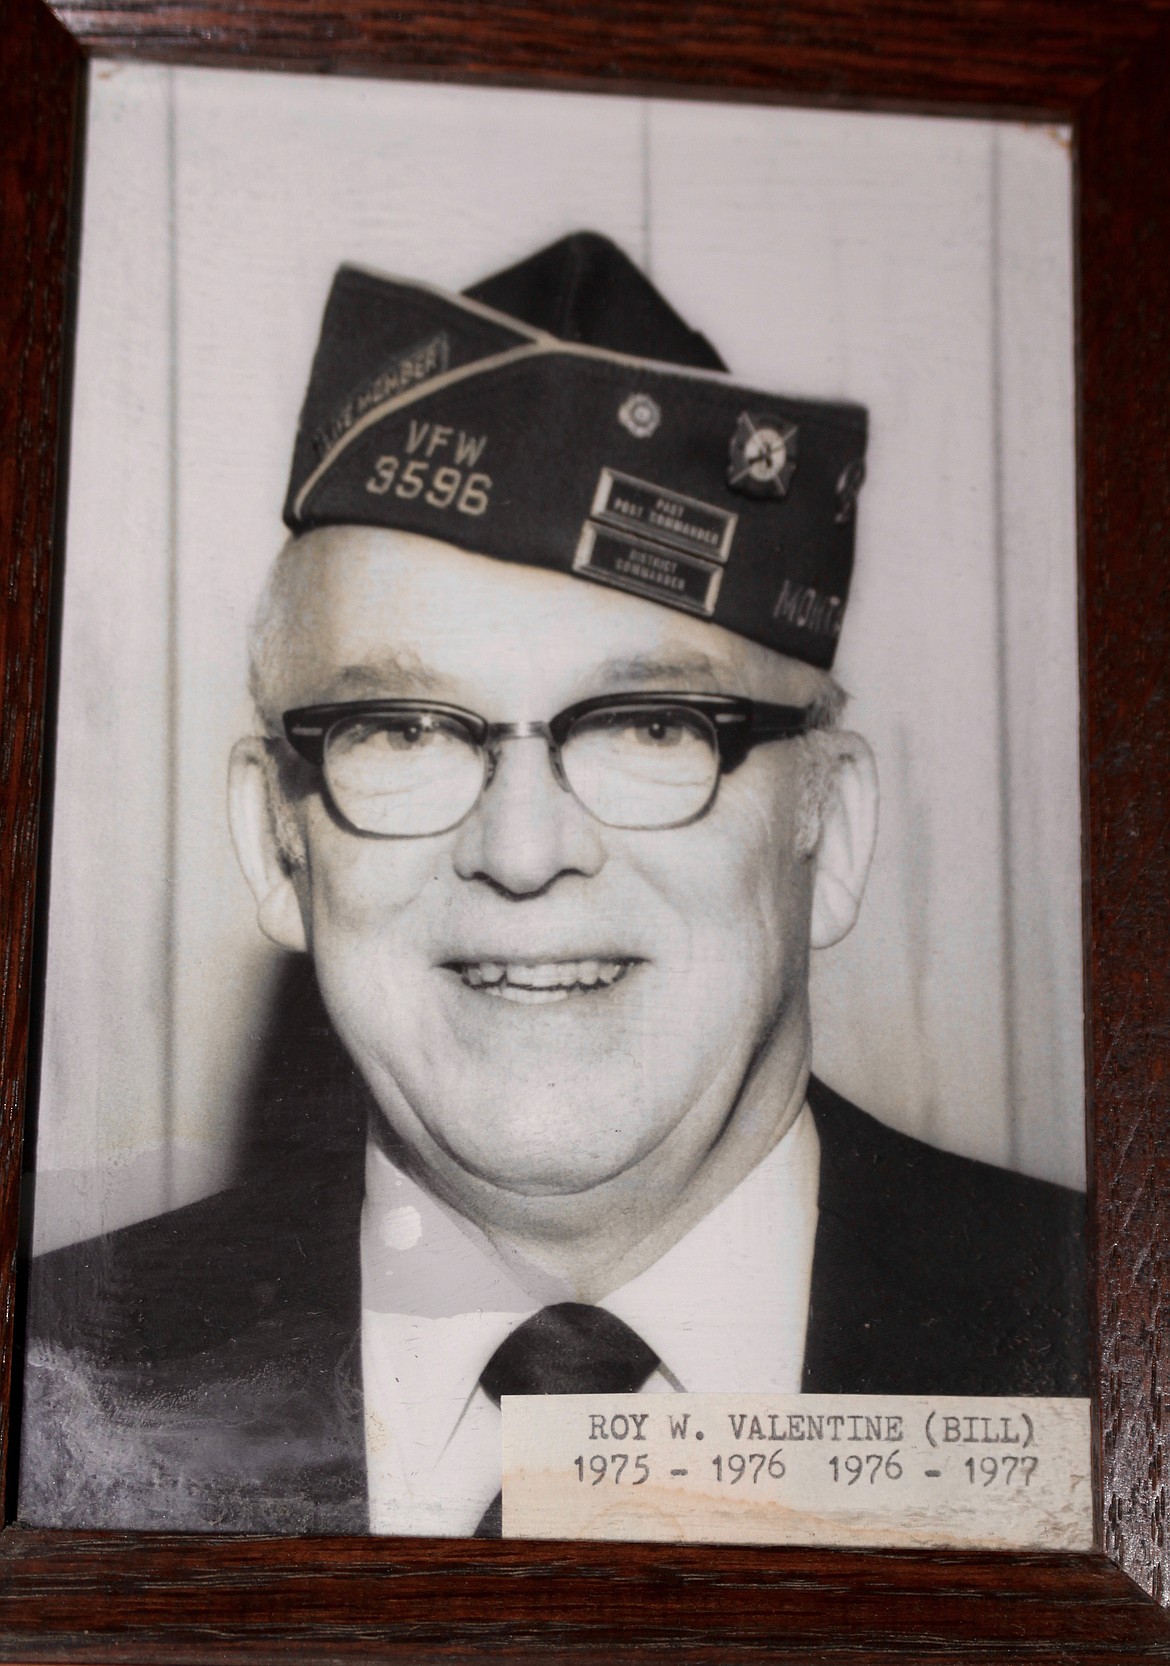 Roy W Valentine (Bill) was the Commender of the Plains VFW from 1975-1976 and 1976-1977.